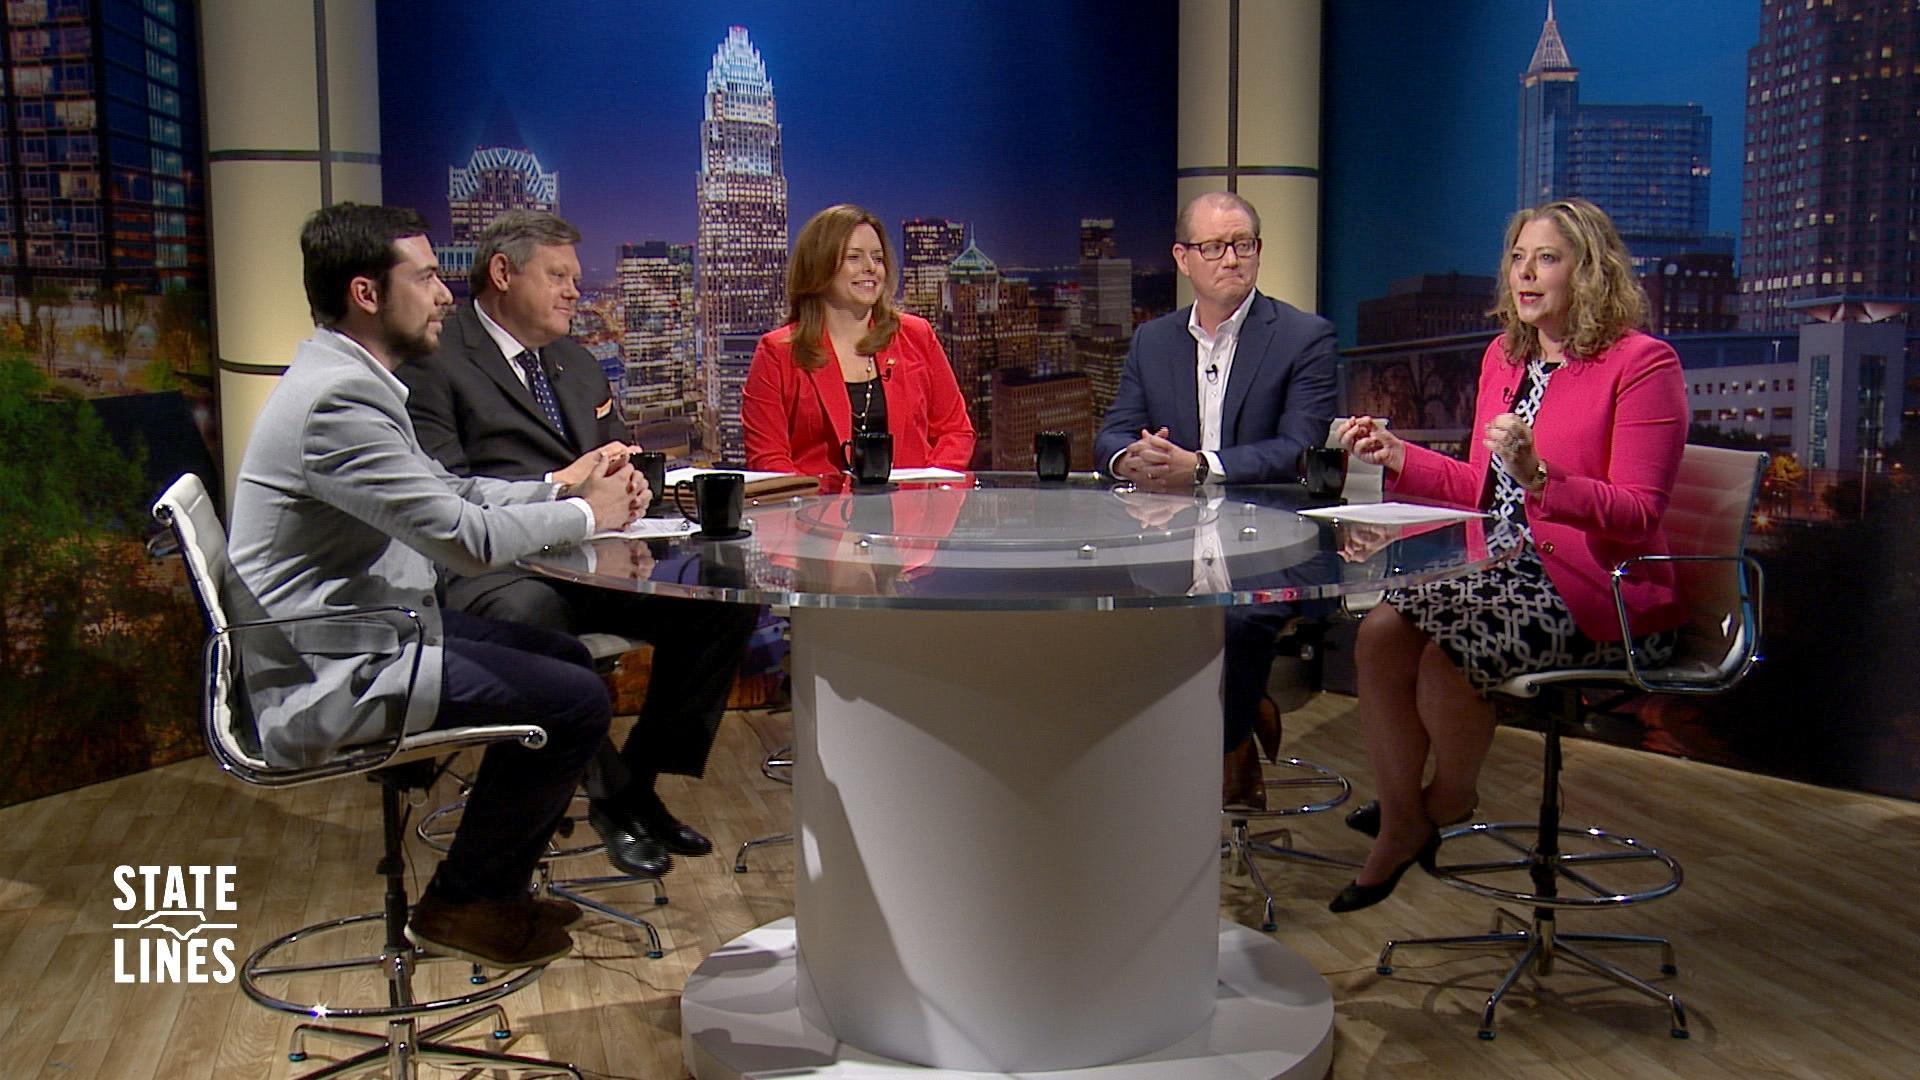 Guest host Donna King and panelists sit around a round table with images of the Raleigh skyline on the set behind them.